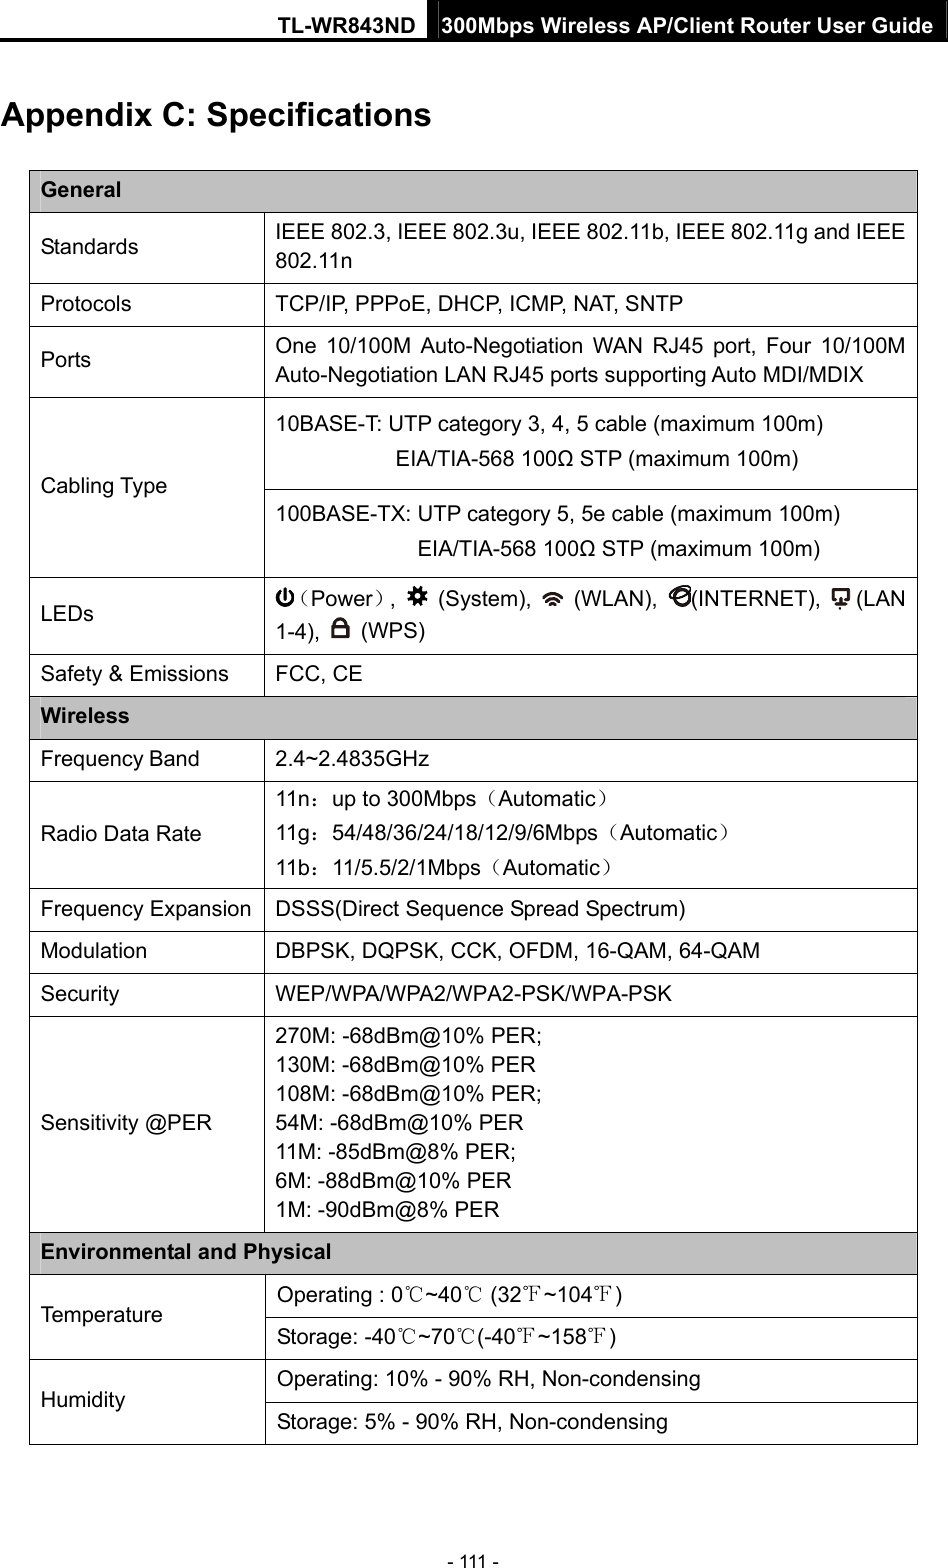 TL-WR843ND 300Mbps Wireless AP/Client Router User Guide - 111 - Appendix C: Specifications General Standards  IEEE 802.3, IEEE 802.3u, IEEE 802.11b, IEEE 802.11g and IEEE 802.11n Protocols  TCP/IP, PPPoE, DHCP, ICMP, NAT, SNTP Ports  One 10/100M Auto-Negotiation WAN RJ45 port, Four 10/100M Auto-Negotiation LAN RJ45 ports supporting Auto MDI/MDIX 10BASE-T: UTP category 3, 4, 5 cable (maximum 100m) EIA/TIA-568 100Ω STP (maximum 100m) Cabling Type 100BASE-TX: UTP category 5, 5e cable (maximum 100m) EIA/TIA-568 100Ω STP (maximum 100m) LEDs  （Power）,   (System),   (WLAN),  (INTERNET),   (LAN 1-4),   (WPS) Safety &amp; Emissions  FCC, CE Wireless Frequency Band 2.4~2.4835GHz Radio Data Rate 11n：up to 300Mbps（Automatic） 11g：54/48/36/24/18/12/9/6Mbps（Automatic） 11b：11/5.5/2/1Mbps（Automatic） Frequency Expansion  DSSS(Direct Sequence Spread Spectrum) Modulation  DBPSK, DQPSK, CCK, OFDM, 16-QAM, 64-QAM Security WEP/WPA/WPA2/WPA2-PSK/WPA-PSK Sensitivity @PER 270M: -68dBm@10% PER; 130M: -68dBm@10% PER 108M: -68dBm@10% PER;   54M: -68dBm@10% PER 11M: -85dBm@8% PER;   6M: -88dBm@10% PER 1M: -90dBm@8% PER Environmental and Physical Operating : 0~40 (32 ~104) Temperature Storage: -40~70(-40~158) Operating: 10% - 90% RH, Non-condensing Humidity Storage: 5% - 90% RH, Non-condensing 